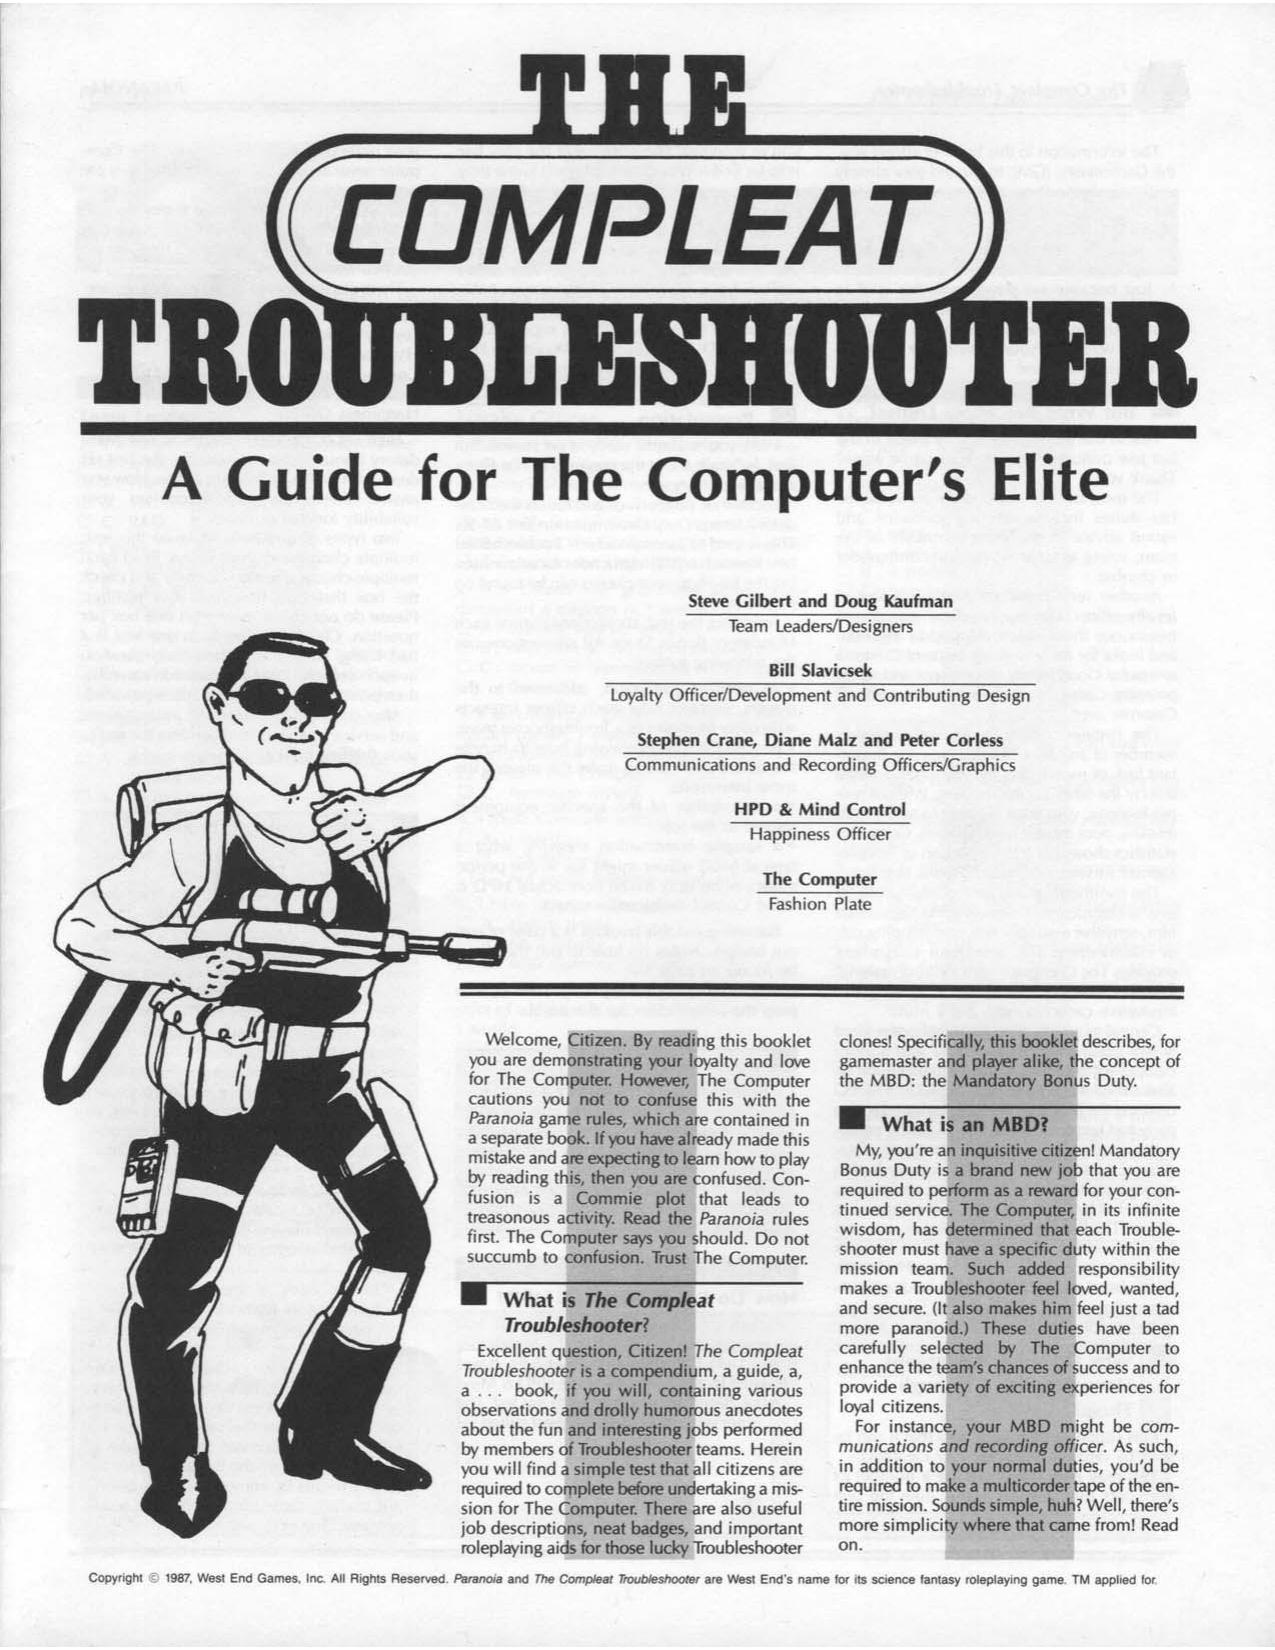 The Compleat Troubleshooter